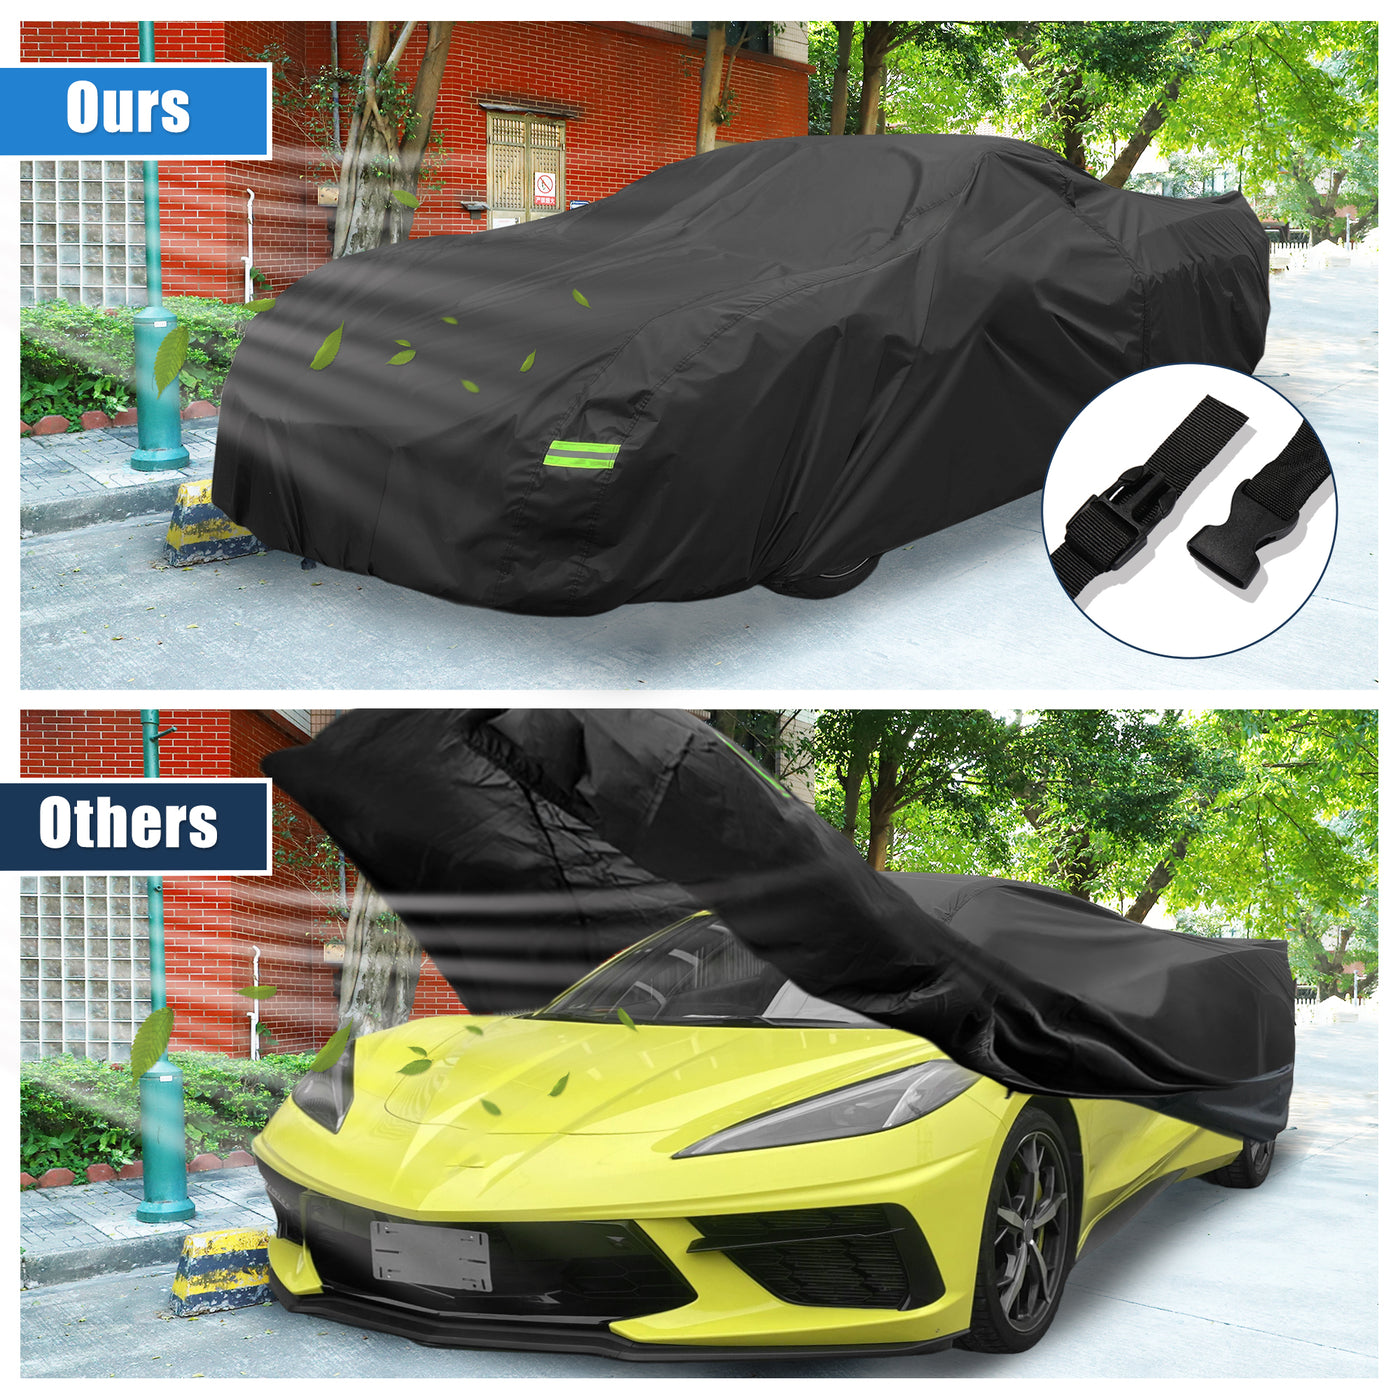 X AUTOHAUX Waterproof Car Cover for Chevrolet Corvette C3 1968-1982 Outdoor Full Car Cover with Zipper Door for Snow Rain Dust All Weather Protection Black